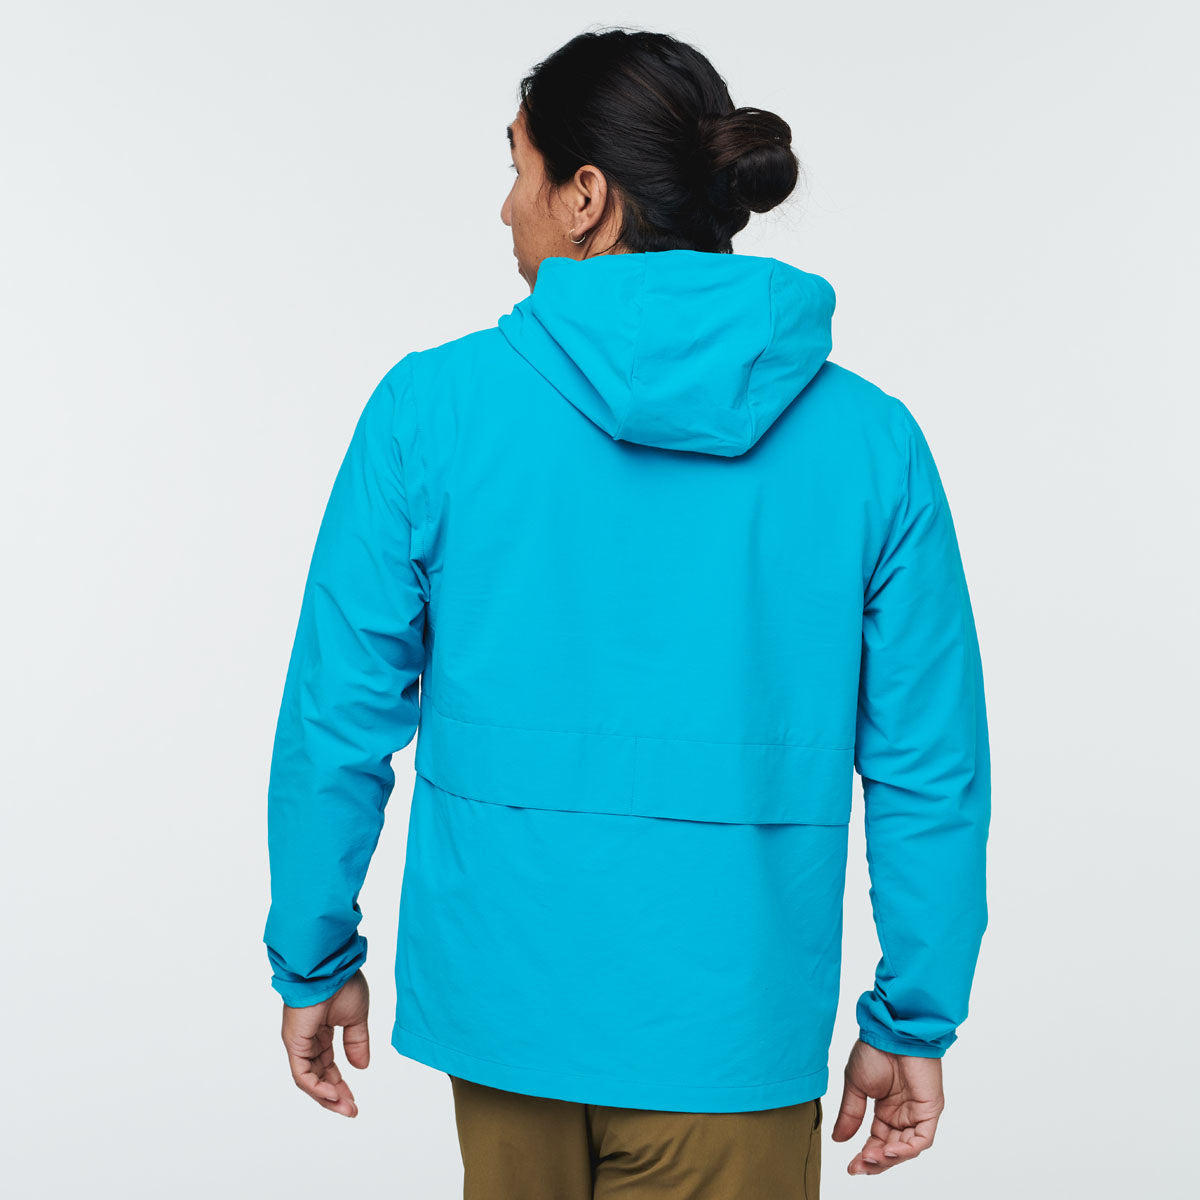 Buy Woodland Mens Polyster Casual Regular Jacket (Teal Blue, S) at Amazon.in